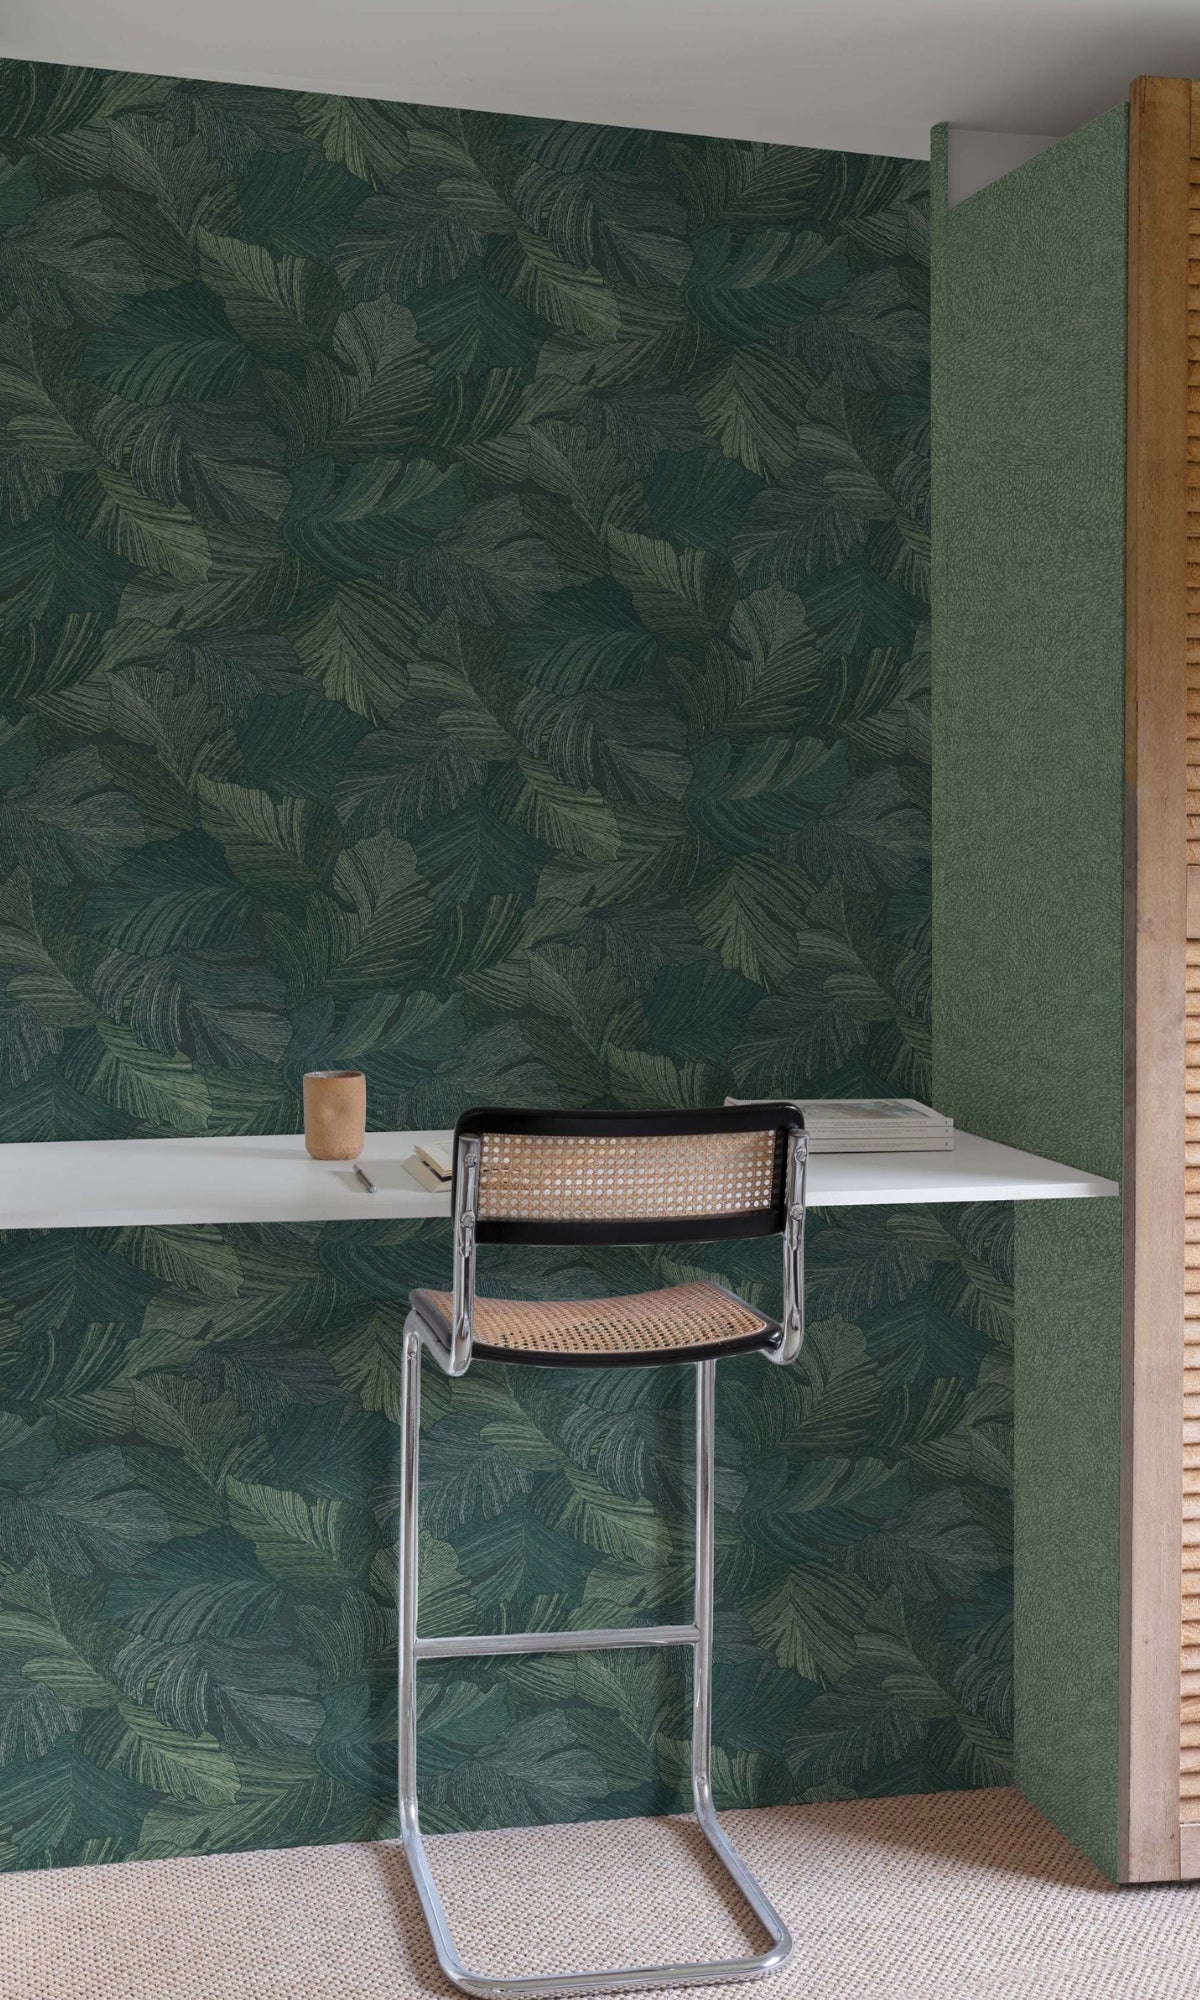 Green Charming Leaves Tropical All Over Wallpaper R9352